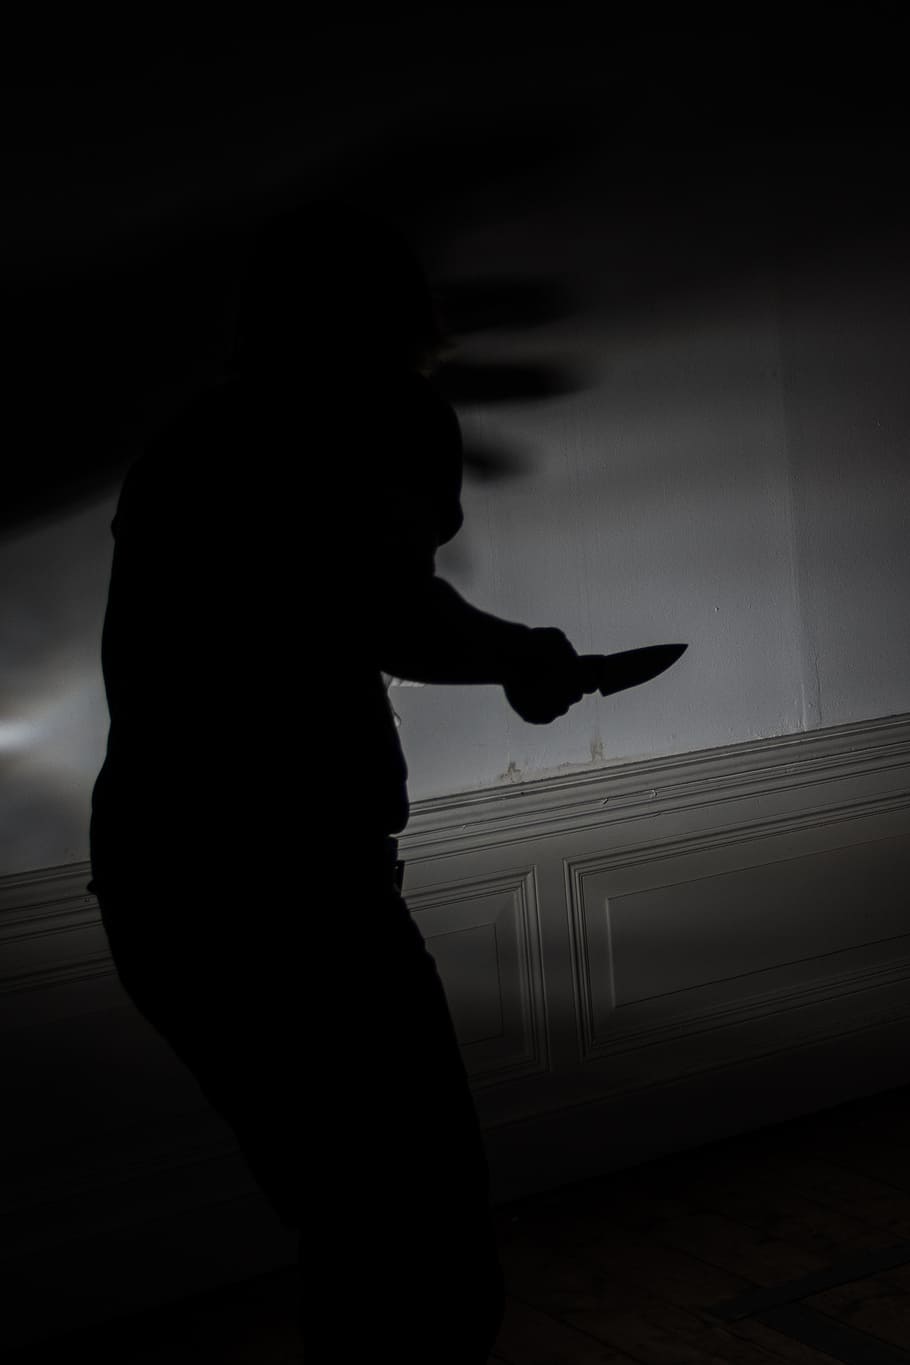 photograph, silhouette person, holding, knife, murder, fear, voltage, attack, suspected, night